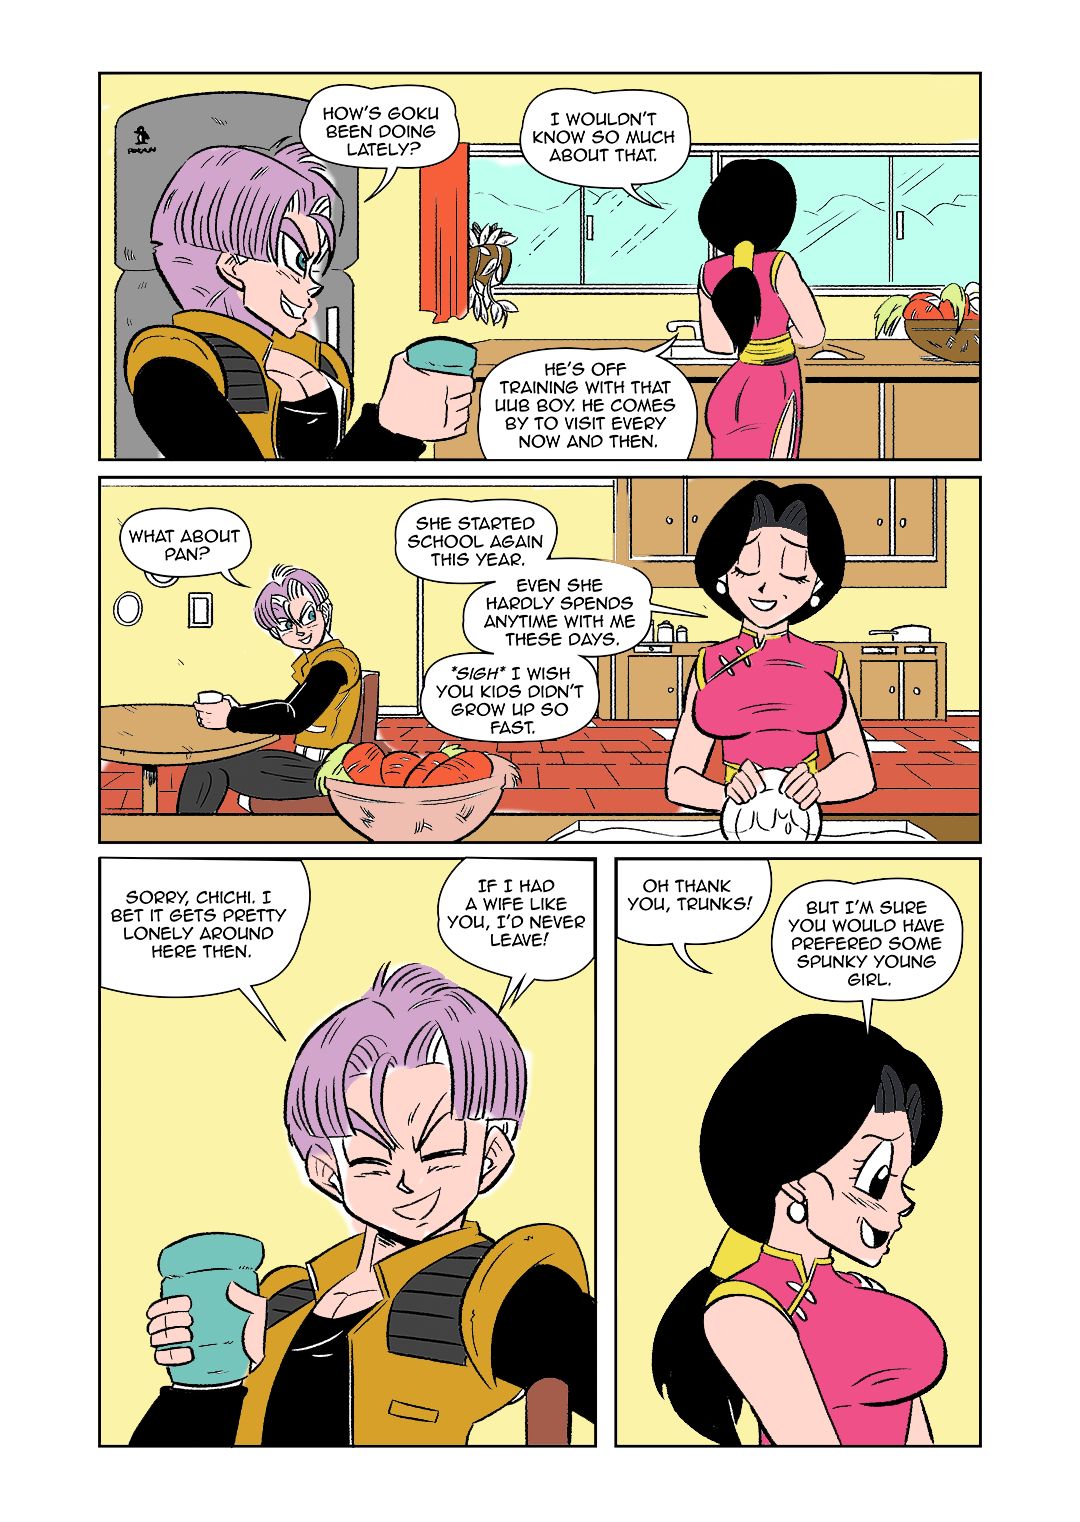 The Switch Up (Dragon Ball Z) by Funsexydb page 5